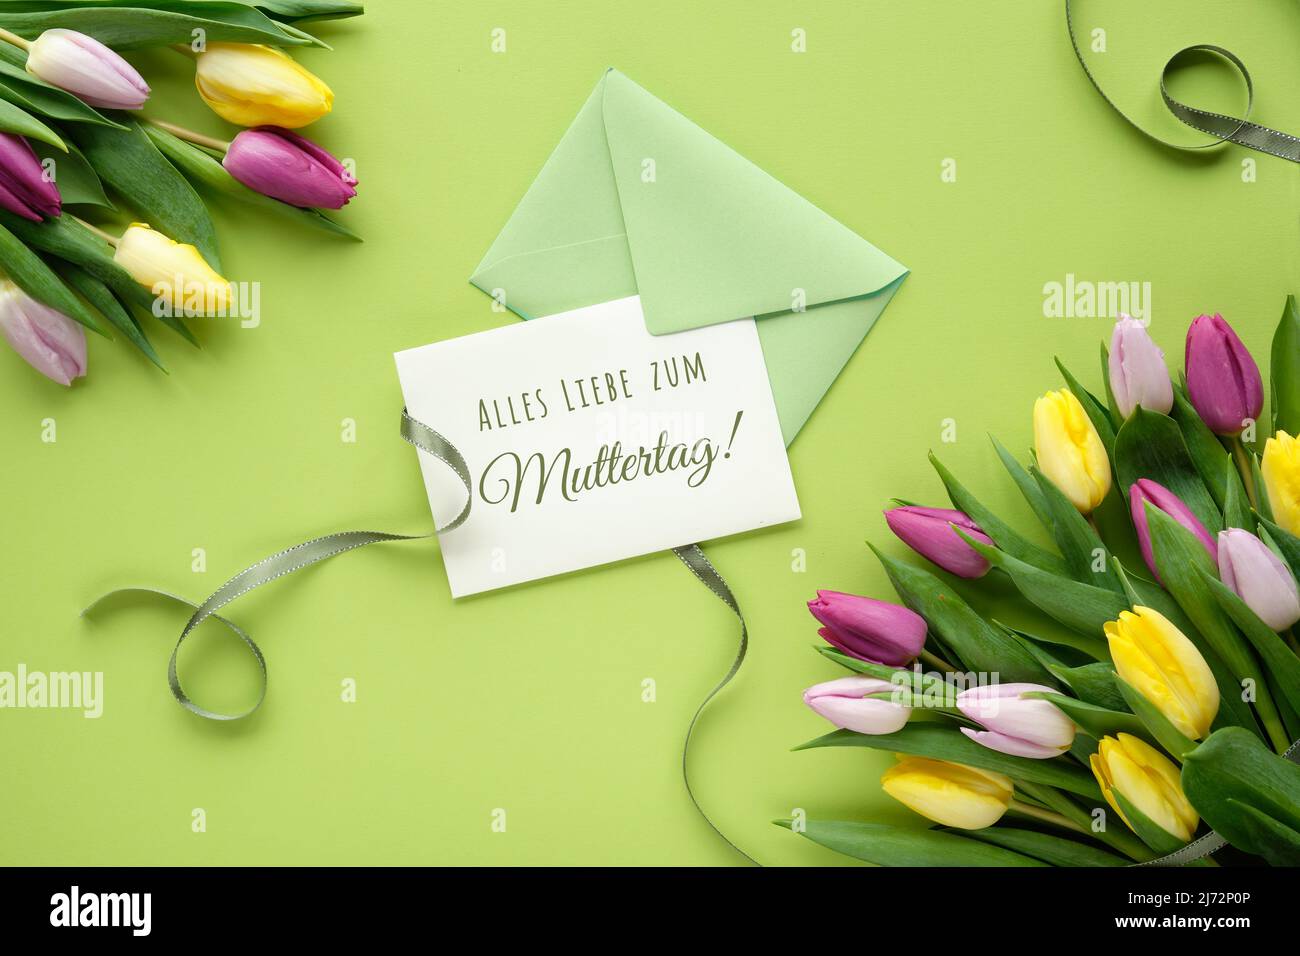 Alles Liebe zum Muttertag text, flat lay with colorful tulips, flat lay on paper with ribbons. Stock Photo